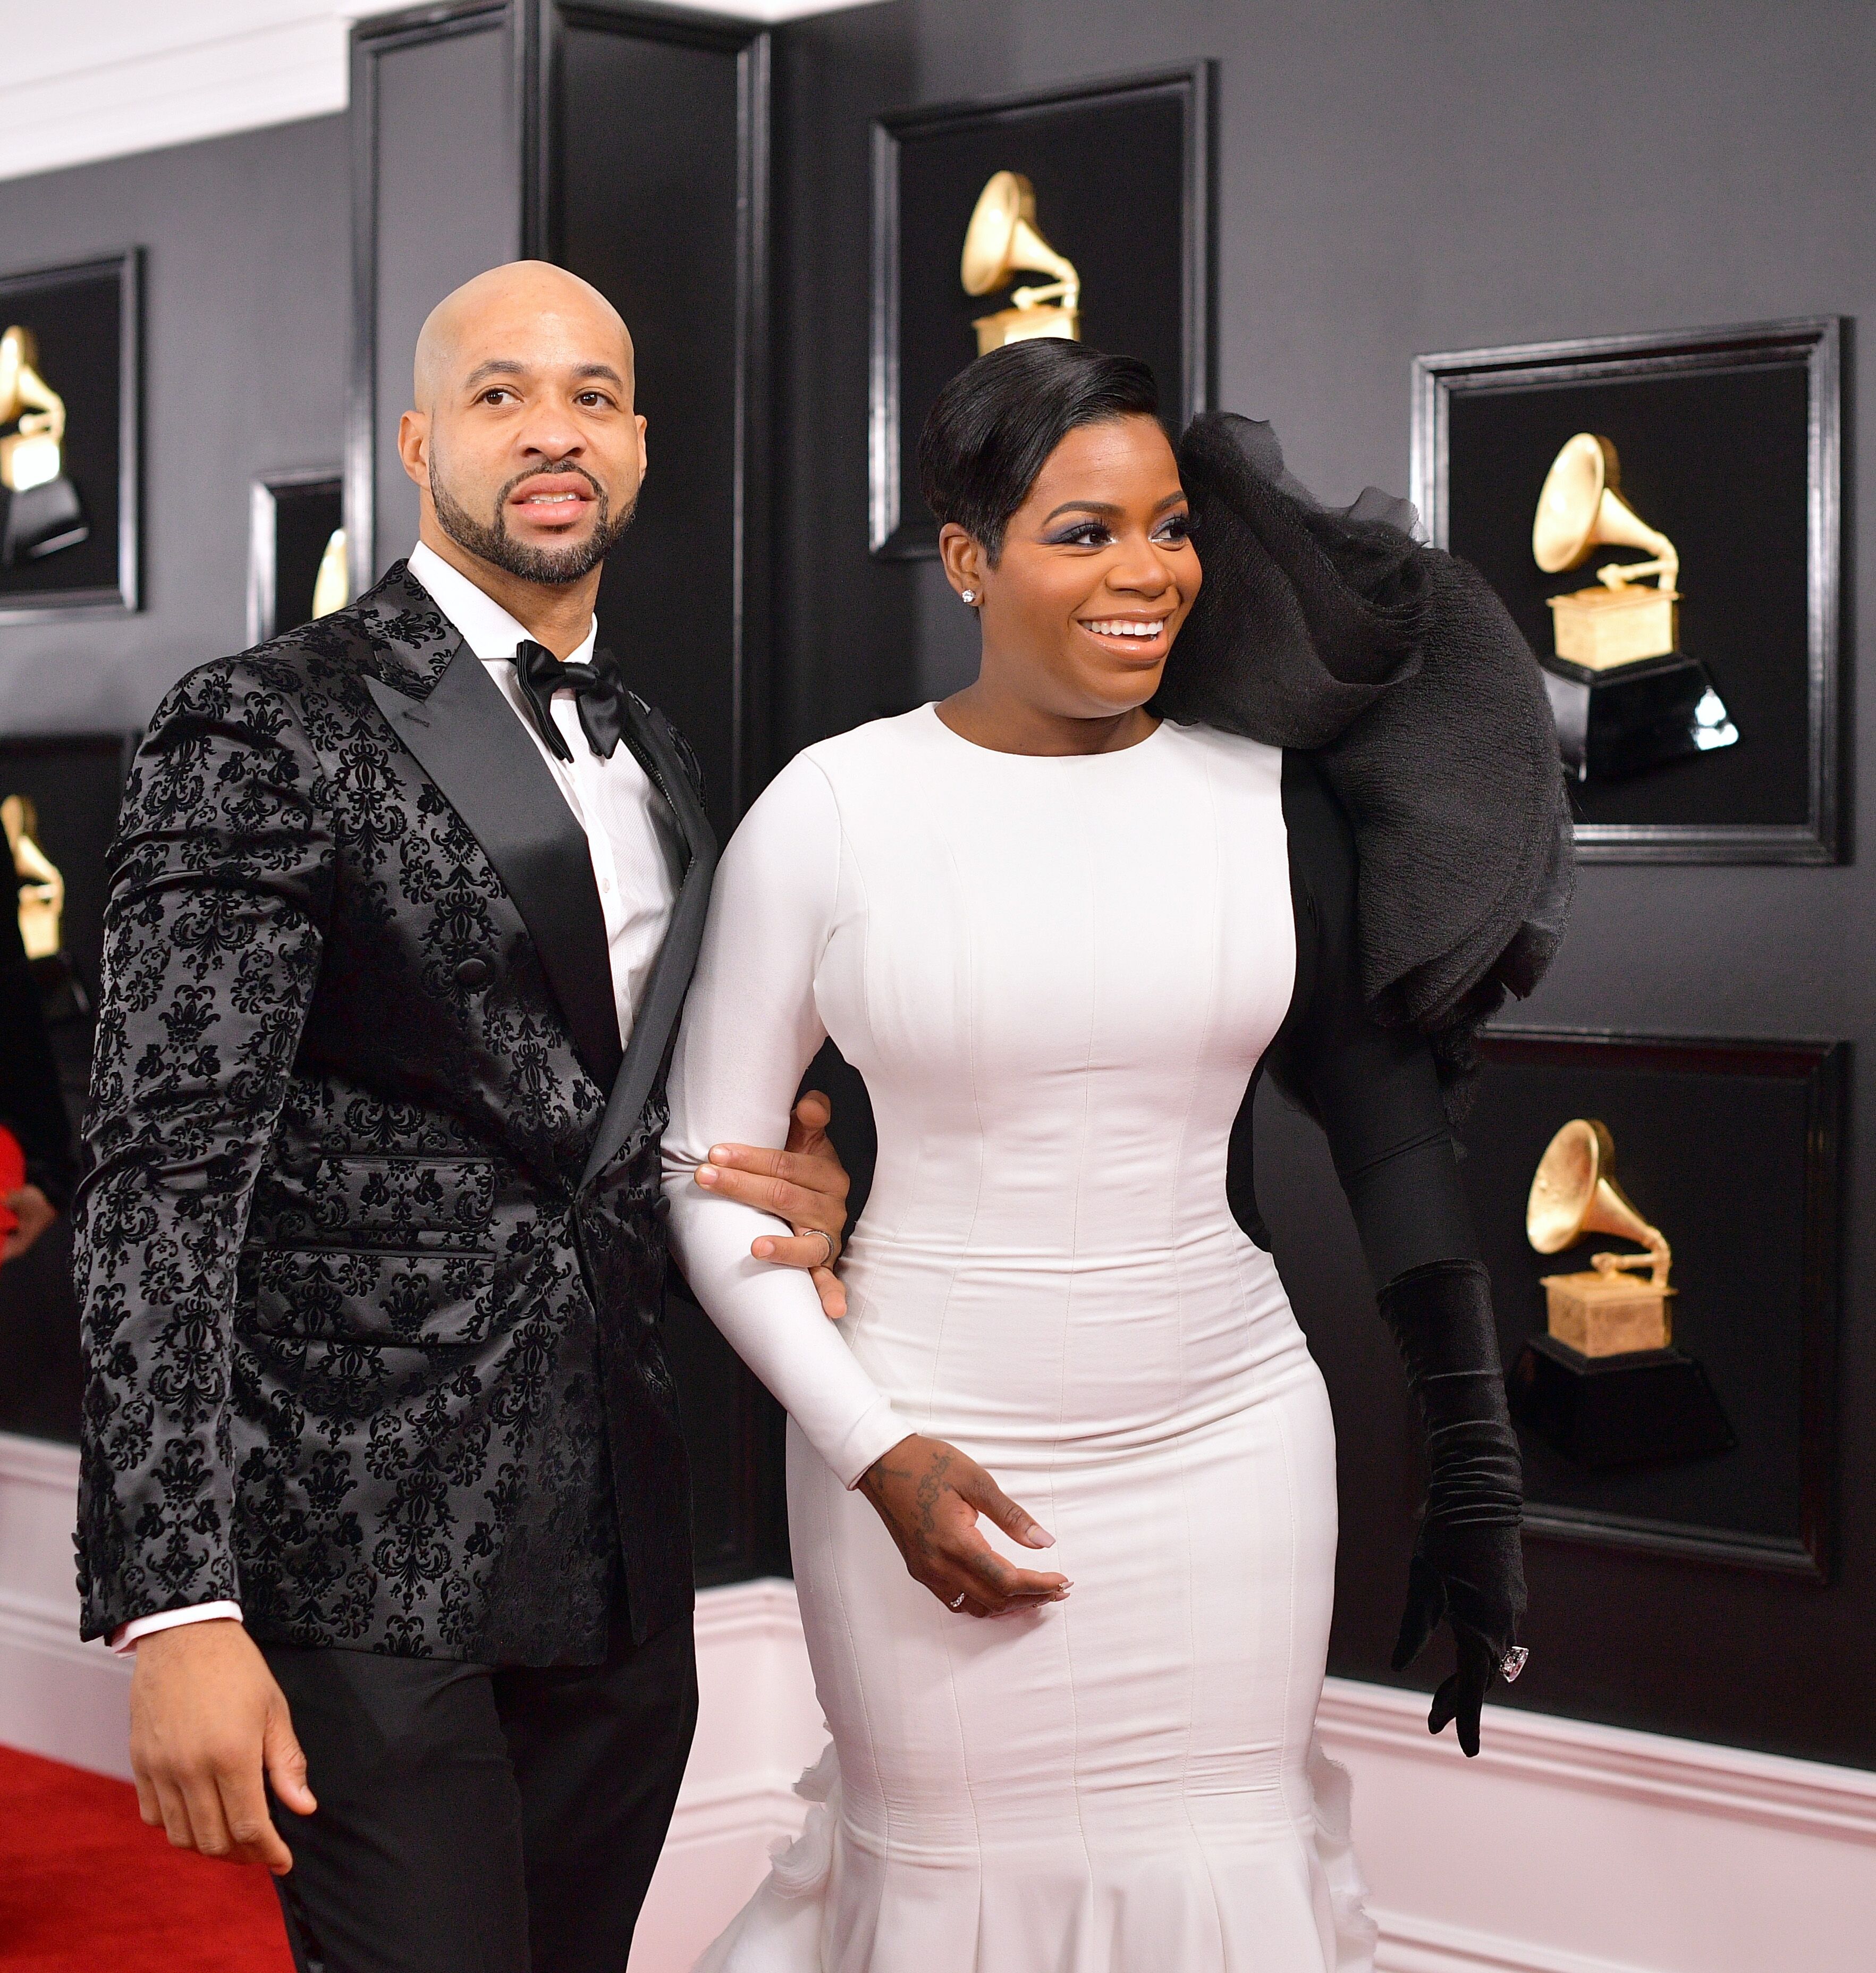 Fantasia Barrino with husband Kendall Taylor at the Grammys | Photo: Getty Images